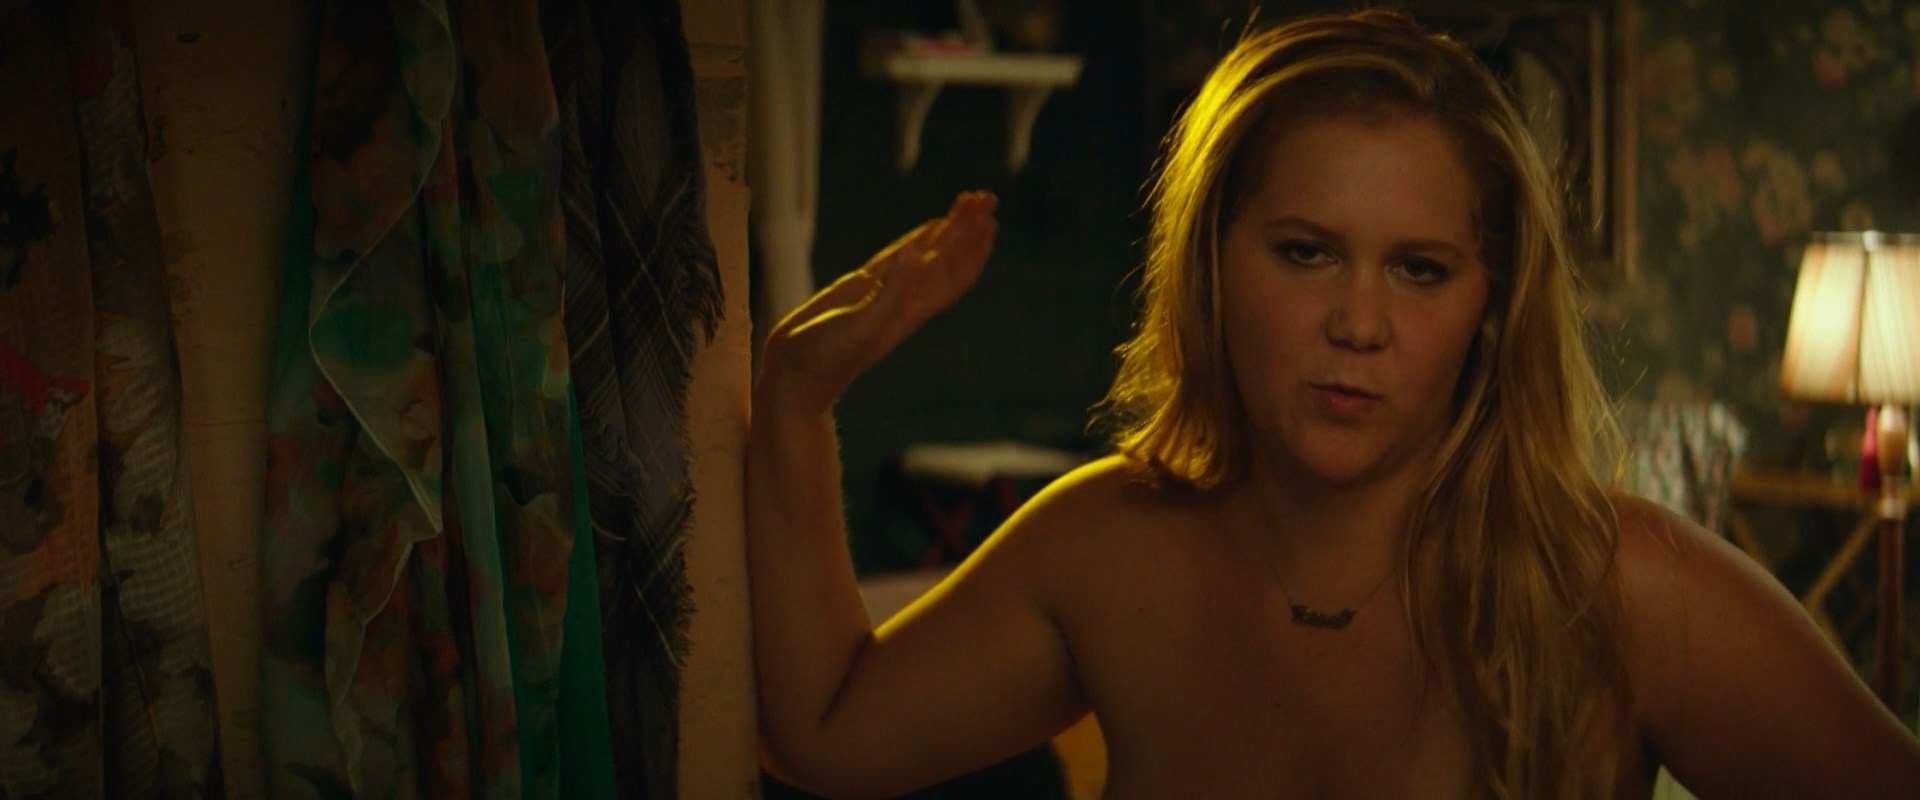 alexandros karaiskakis recommends Amy Schumer Snatched Naked